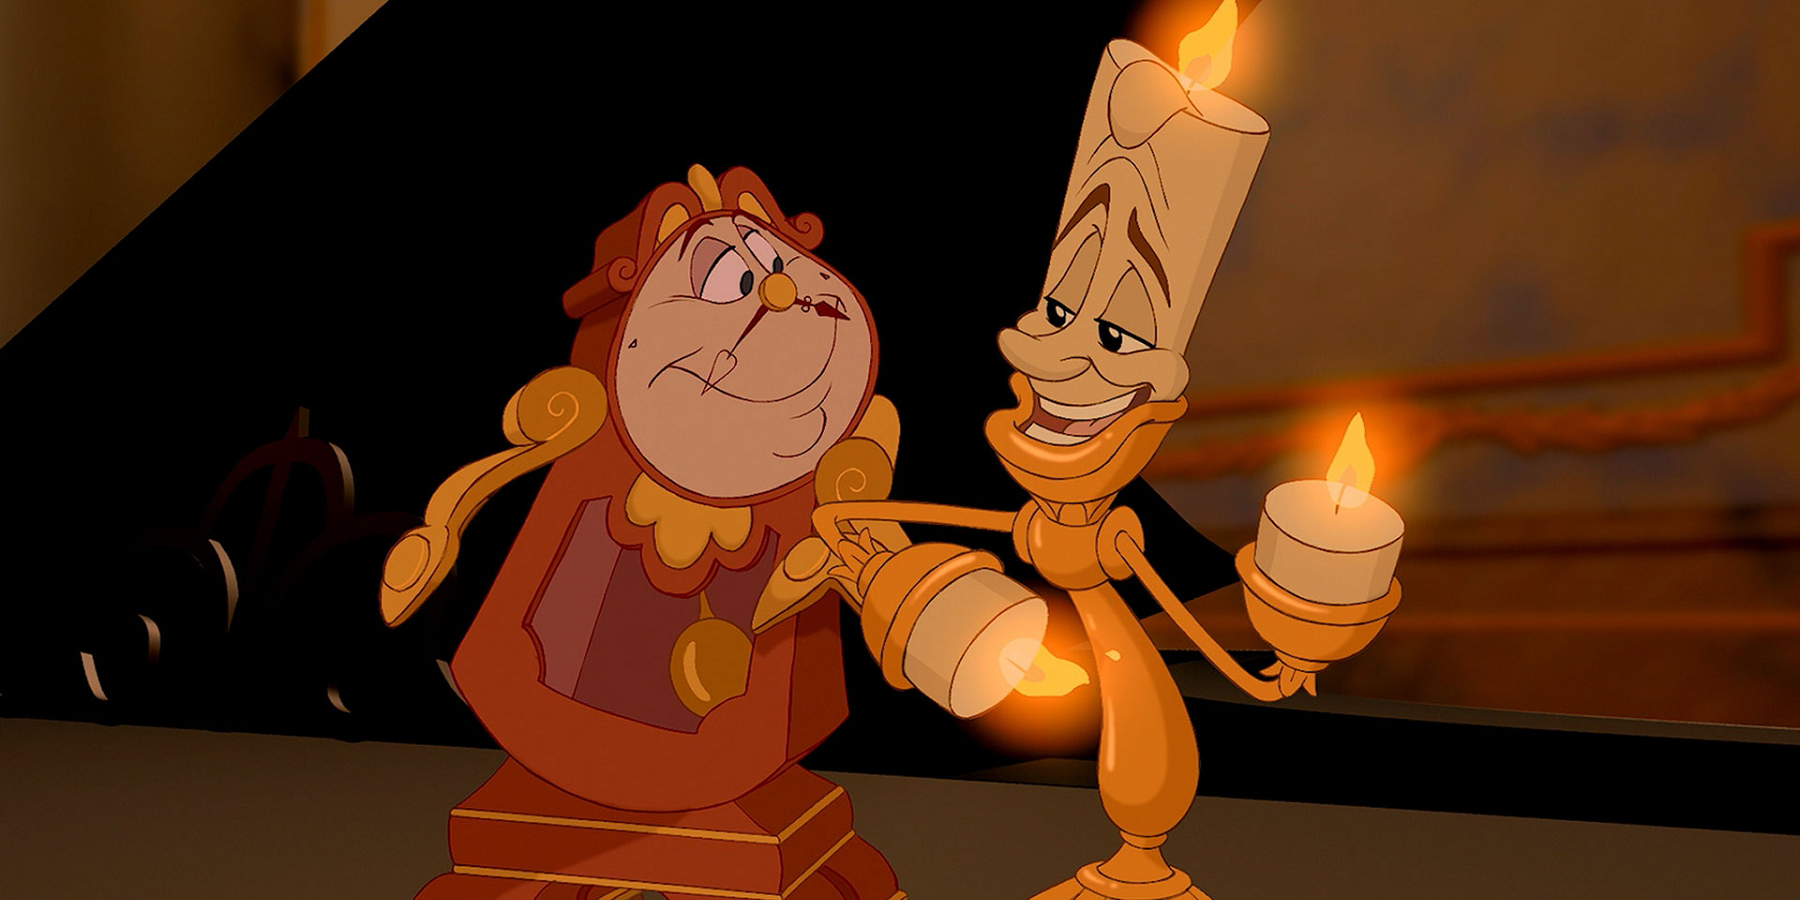 Lumiere and Cogsworth 